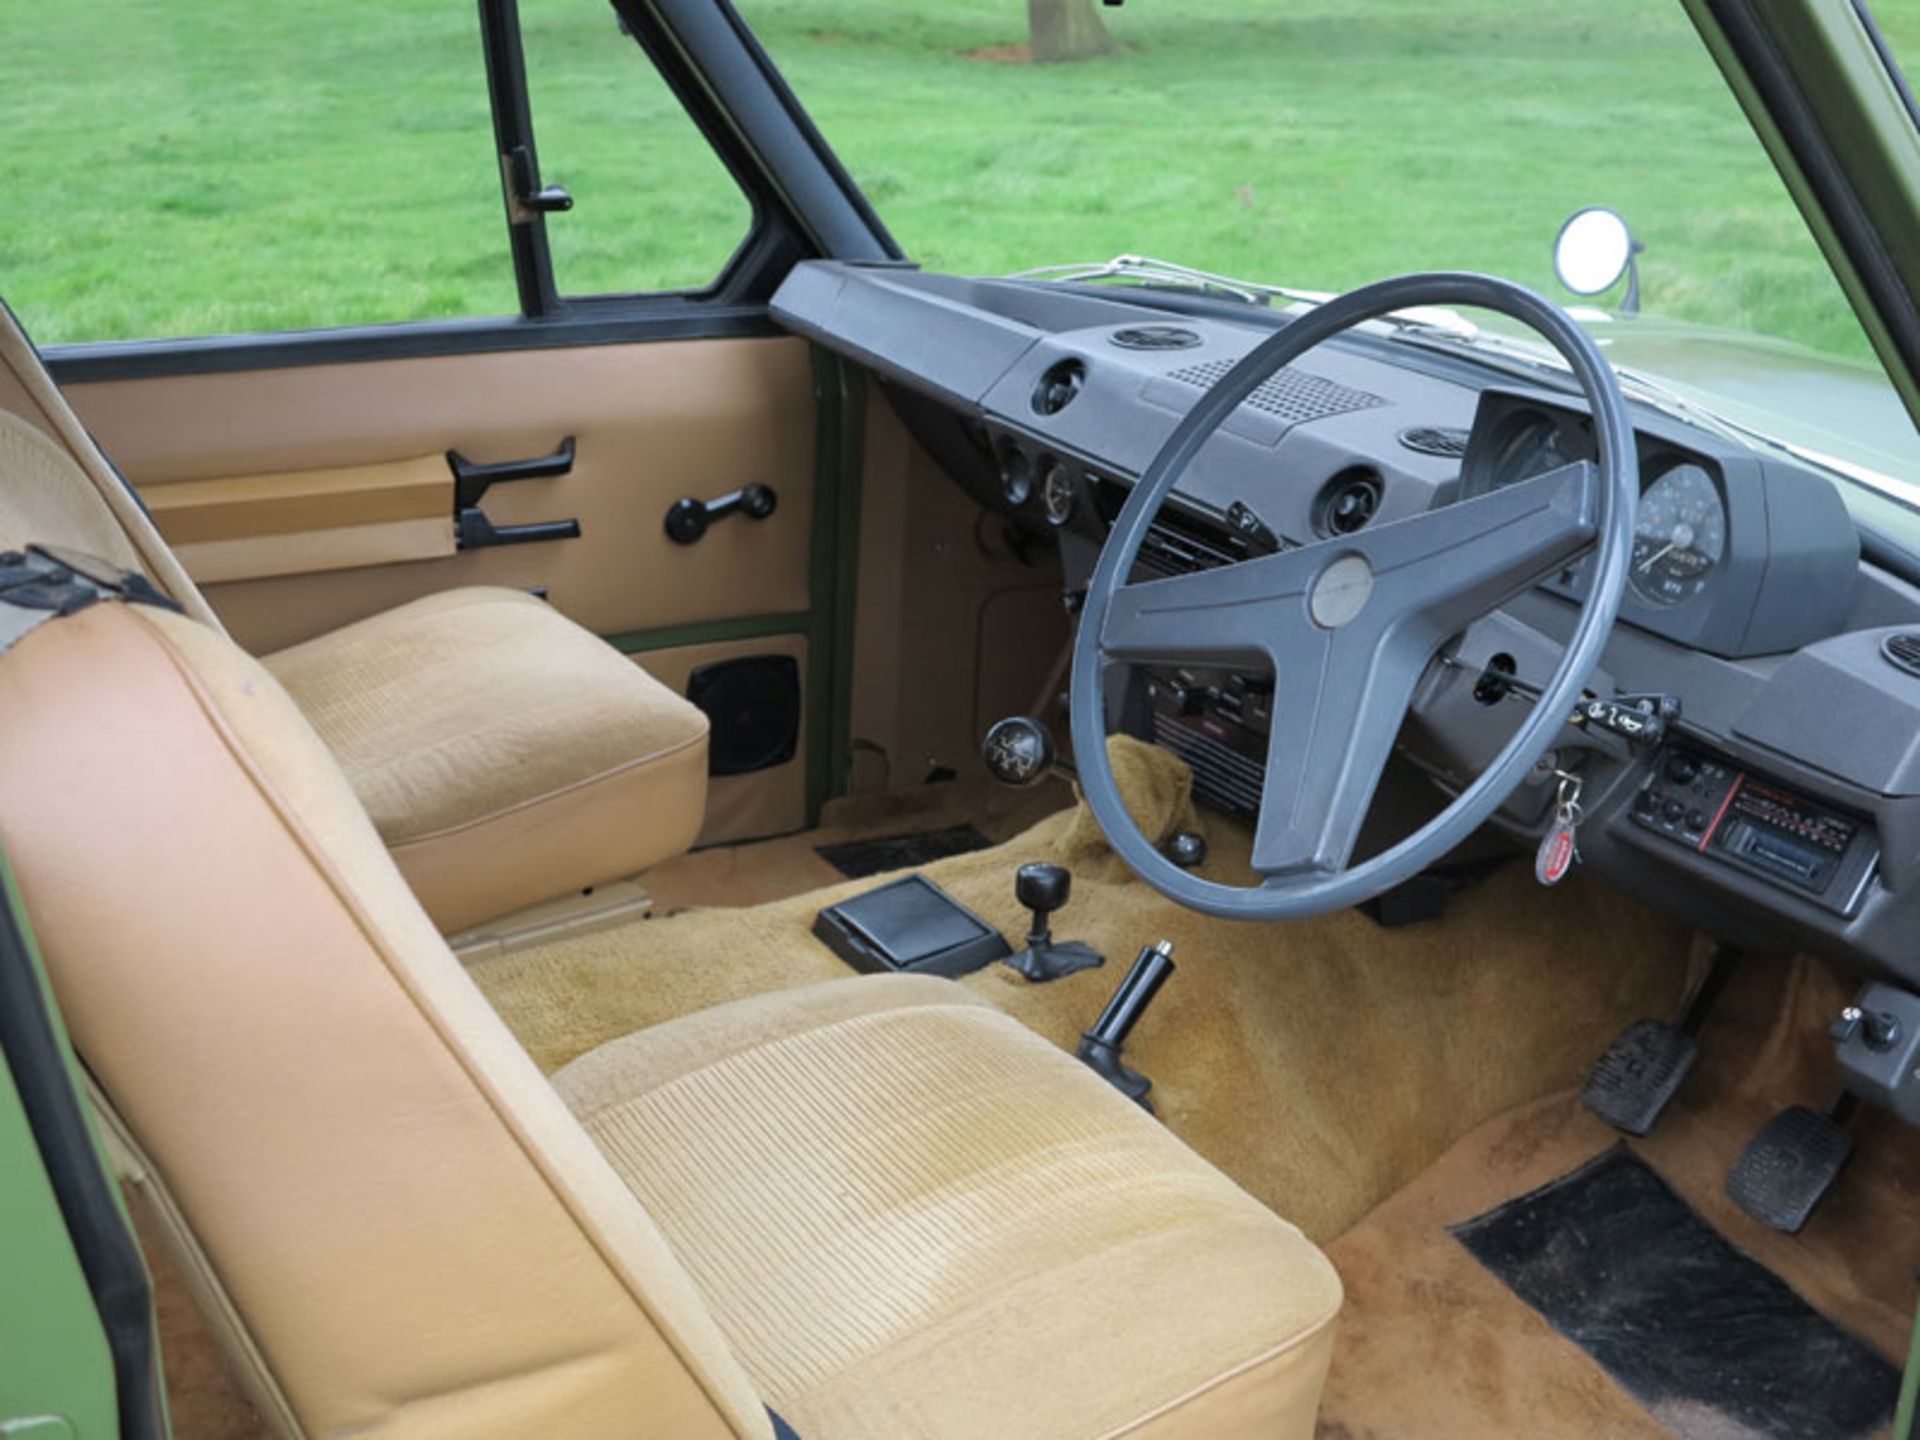 - Rare and desirable 'Suffix A' Range Rover

- 1 of 2,844 Home Market RHD cars built during the 1971 - Image 6 of 16